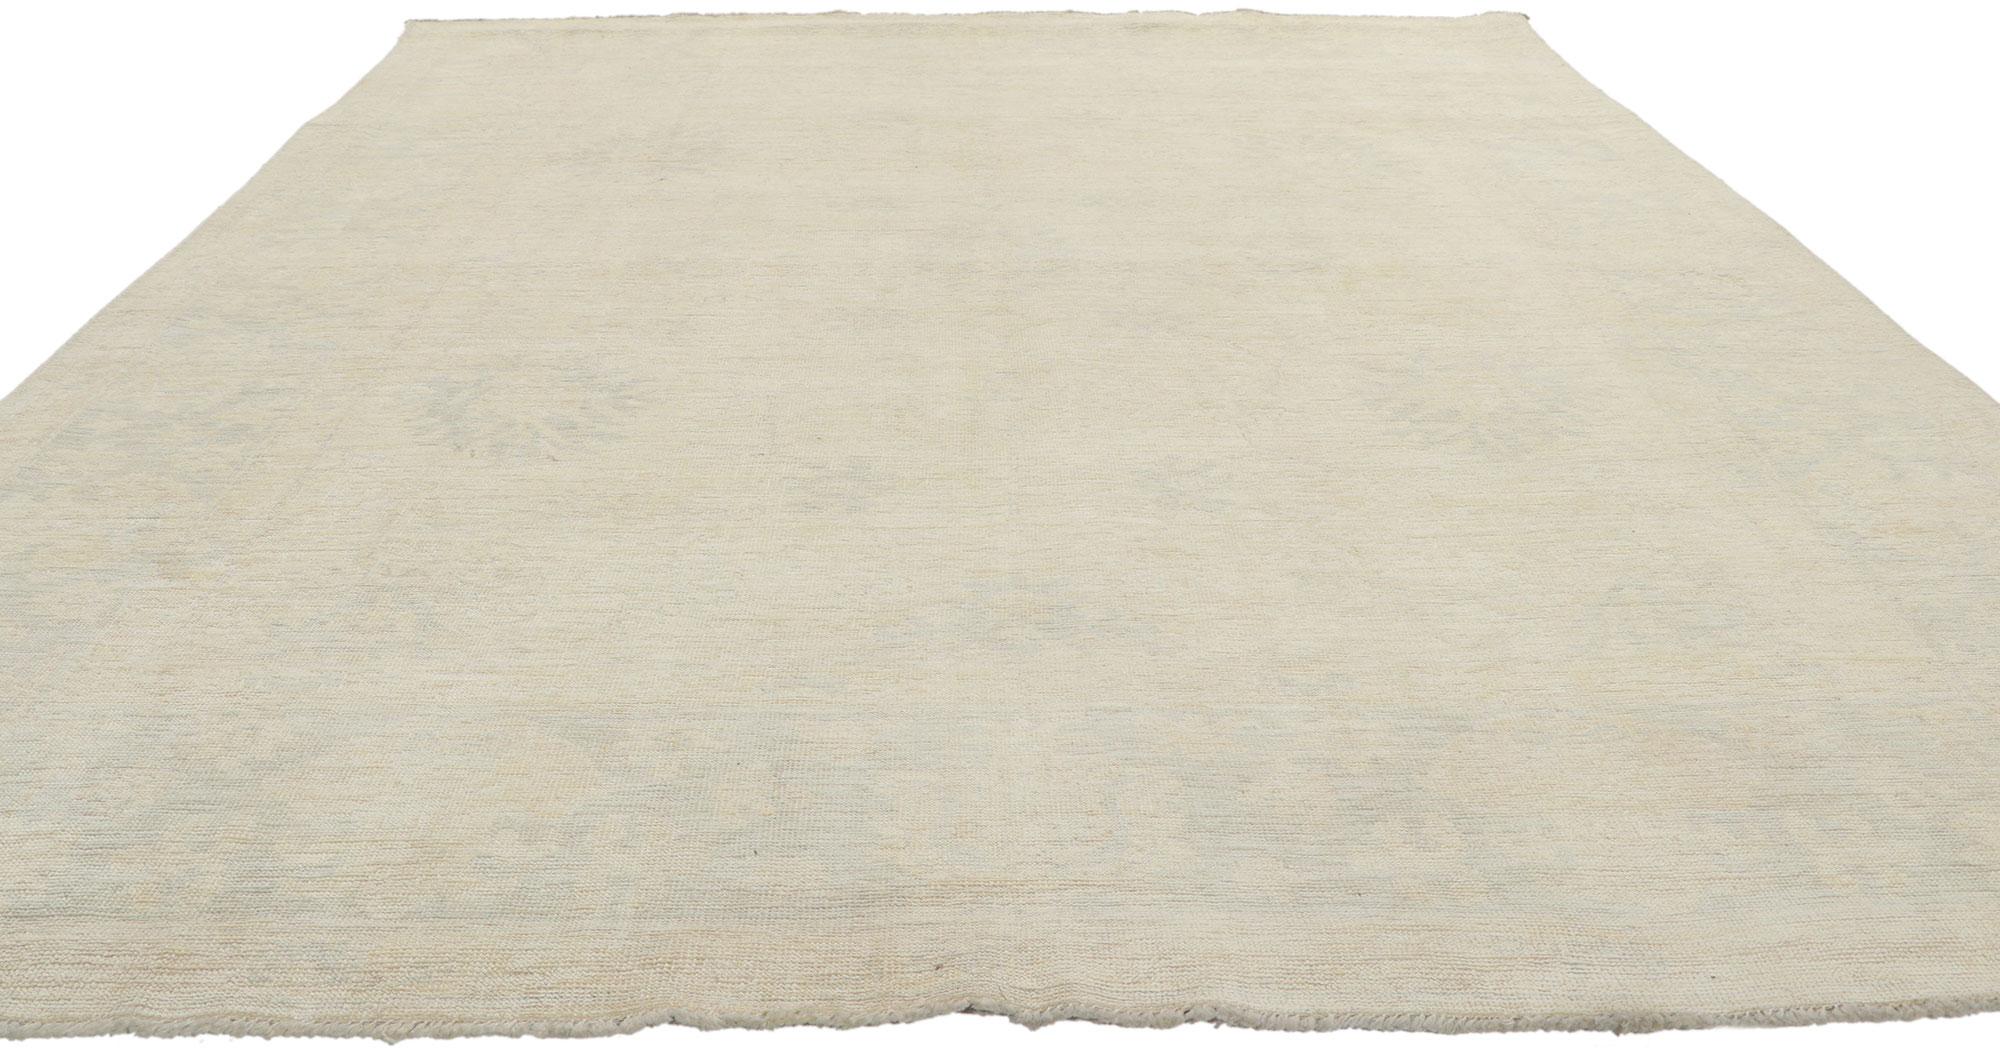 Modern New Vintage-Inspired Muted Oushak Rug with Faded Neutral Colors For Sale